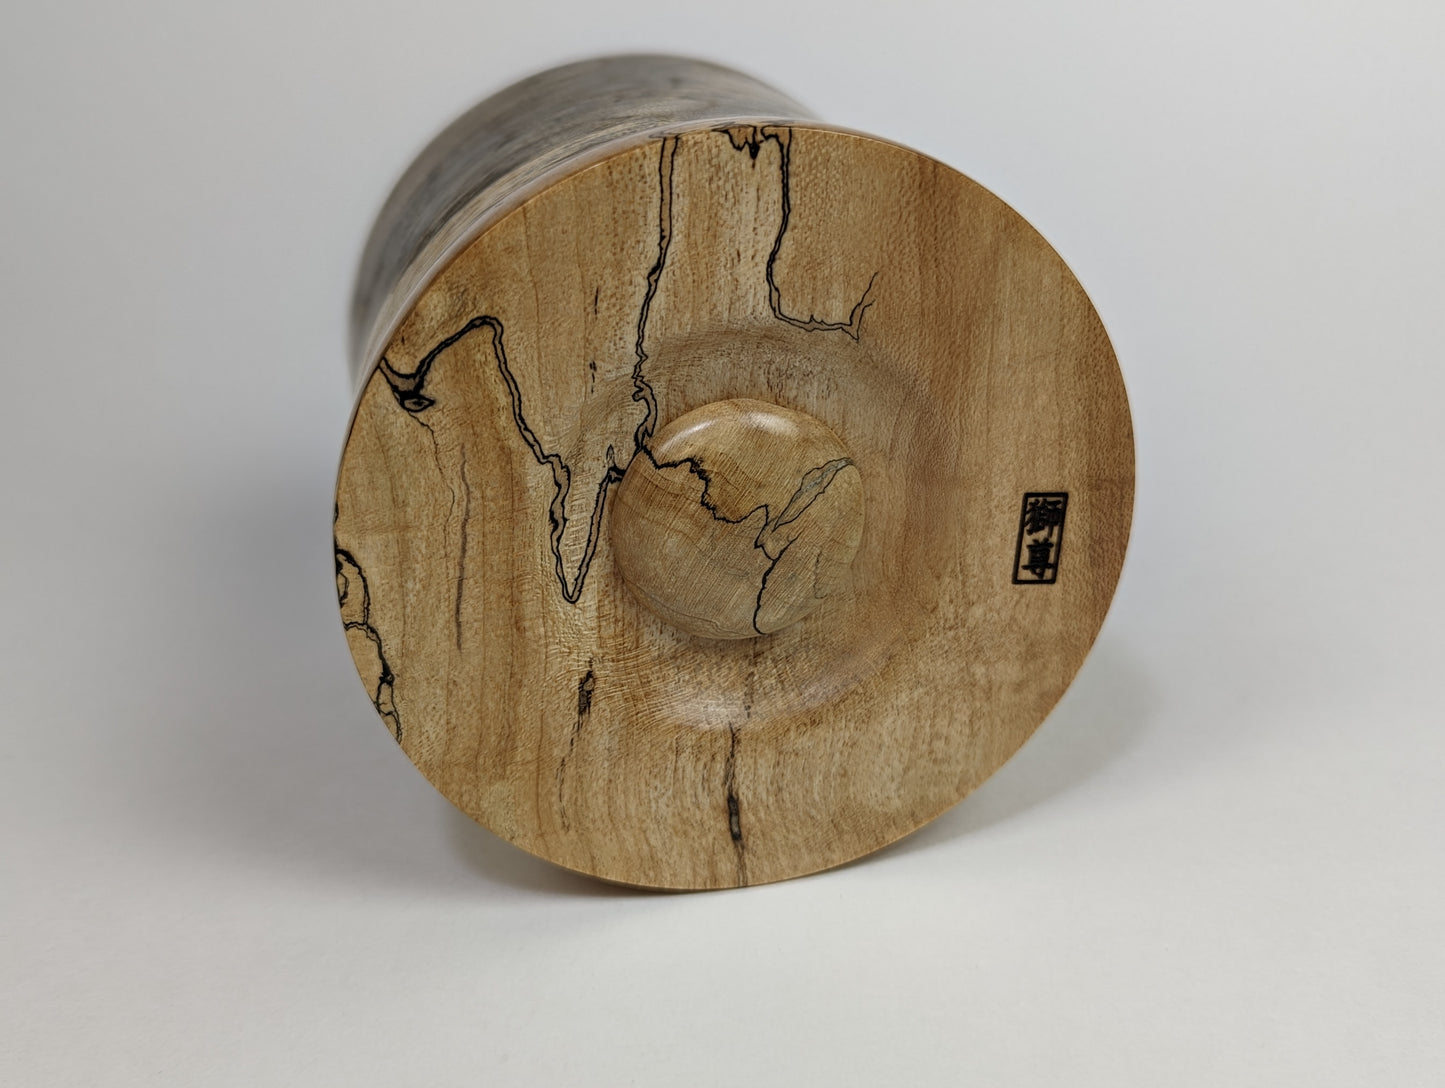 All spalted puzzle pot